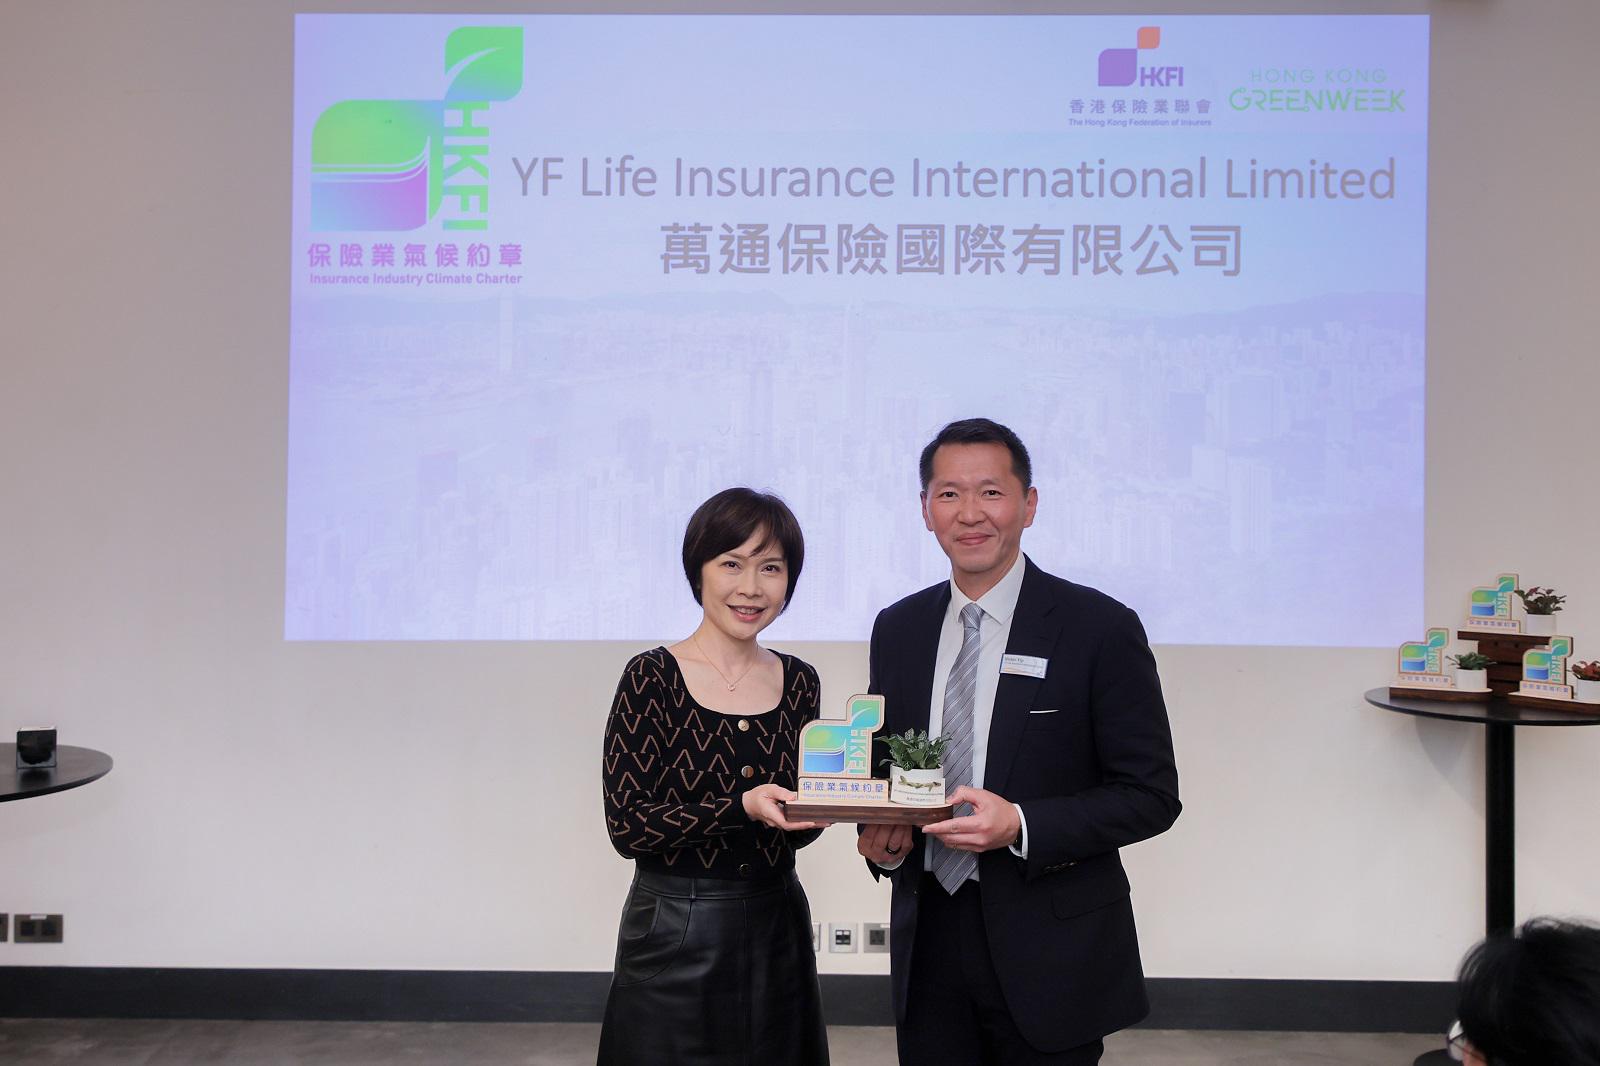 Mr. Victor Yip, Chief Executive Officer at YF Life attended the launching ceremony of HKFI Insurance Industry Climate Charter.